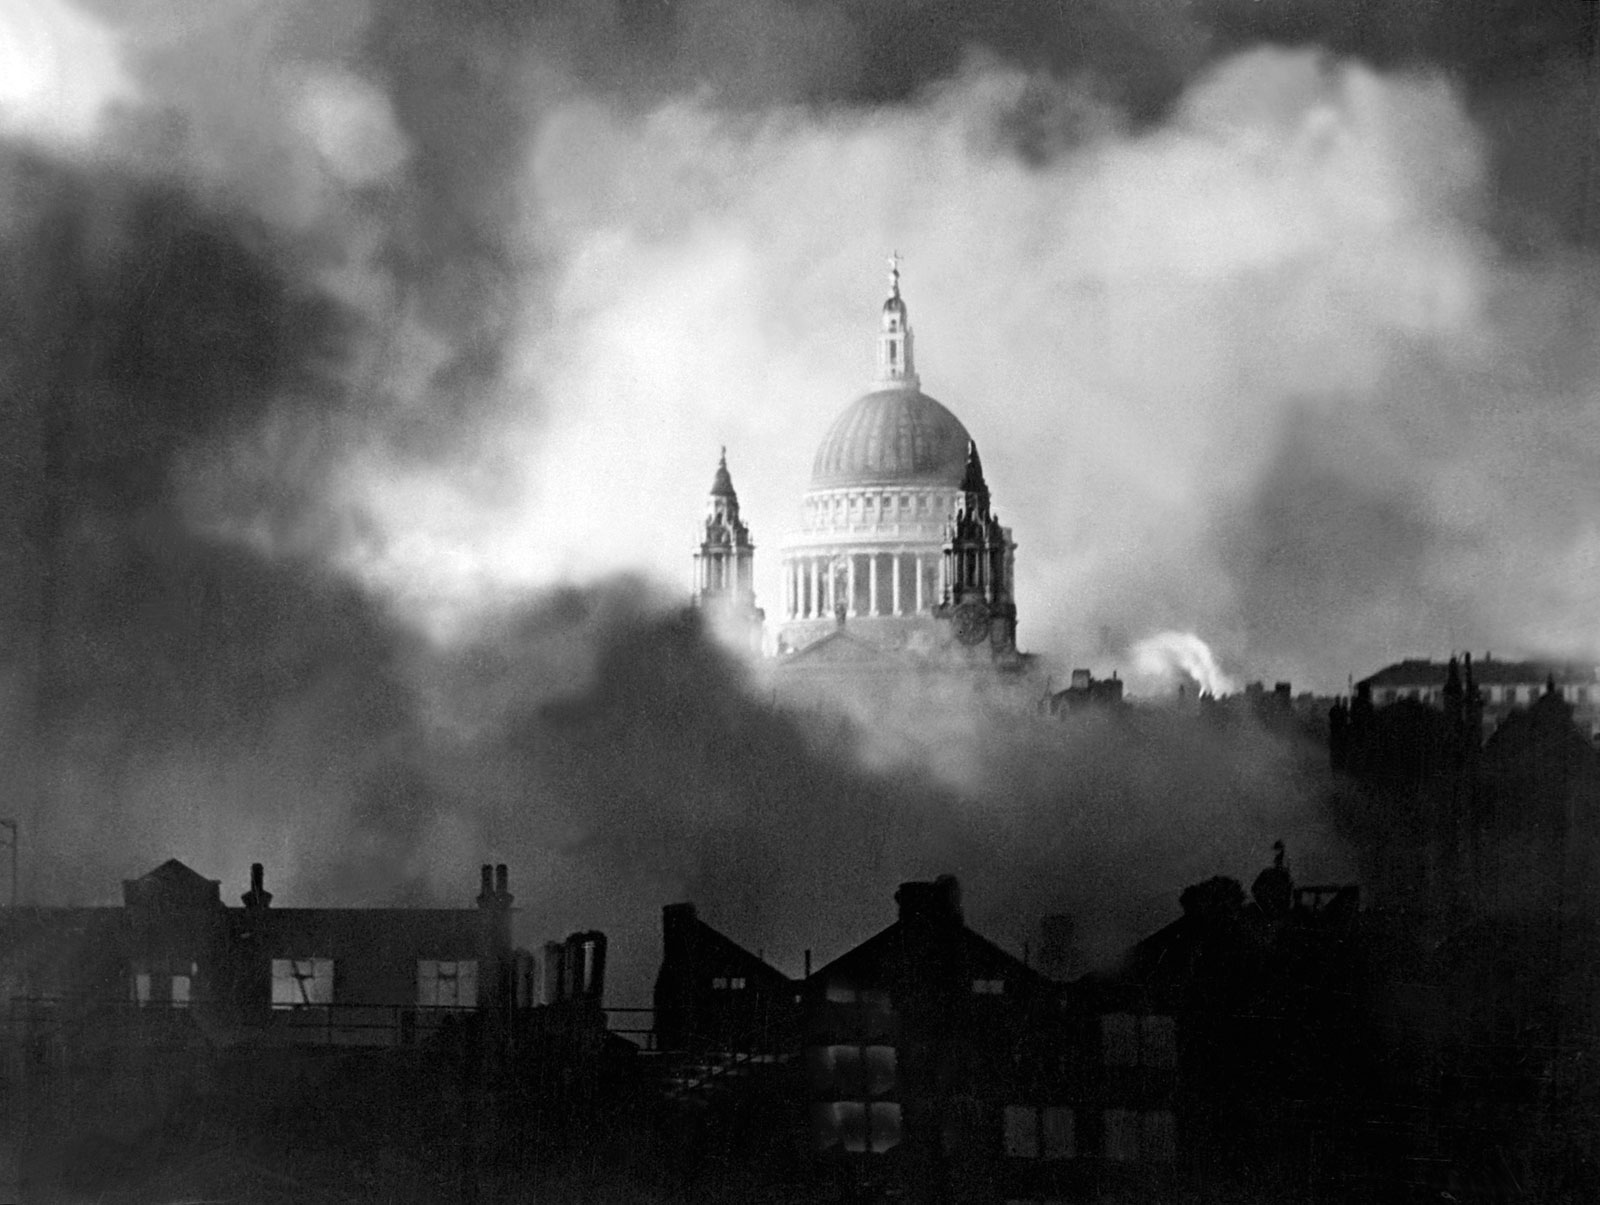 St. Paul's during WWII bombing raid